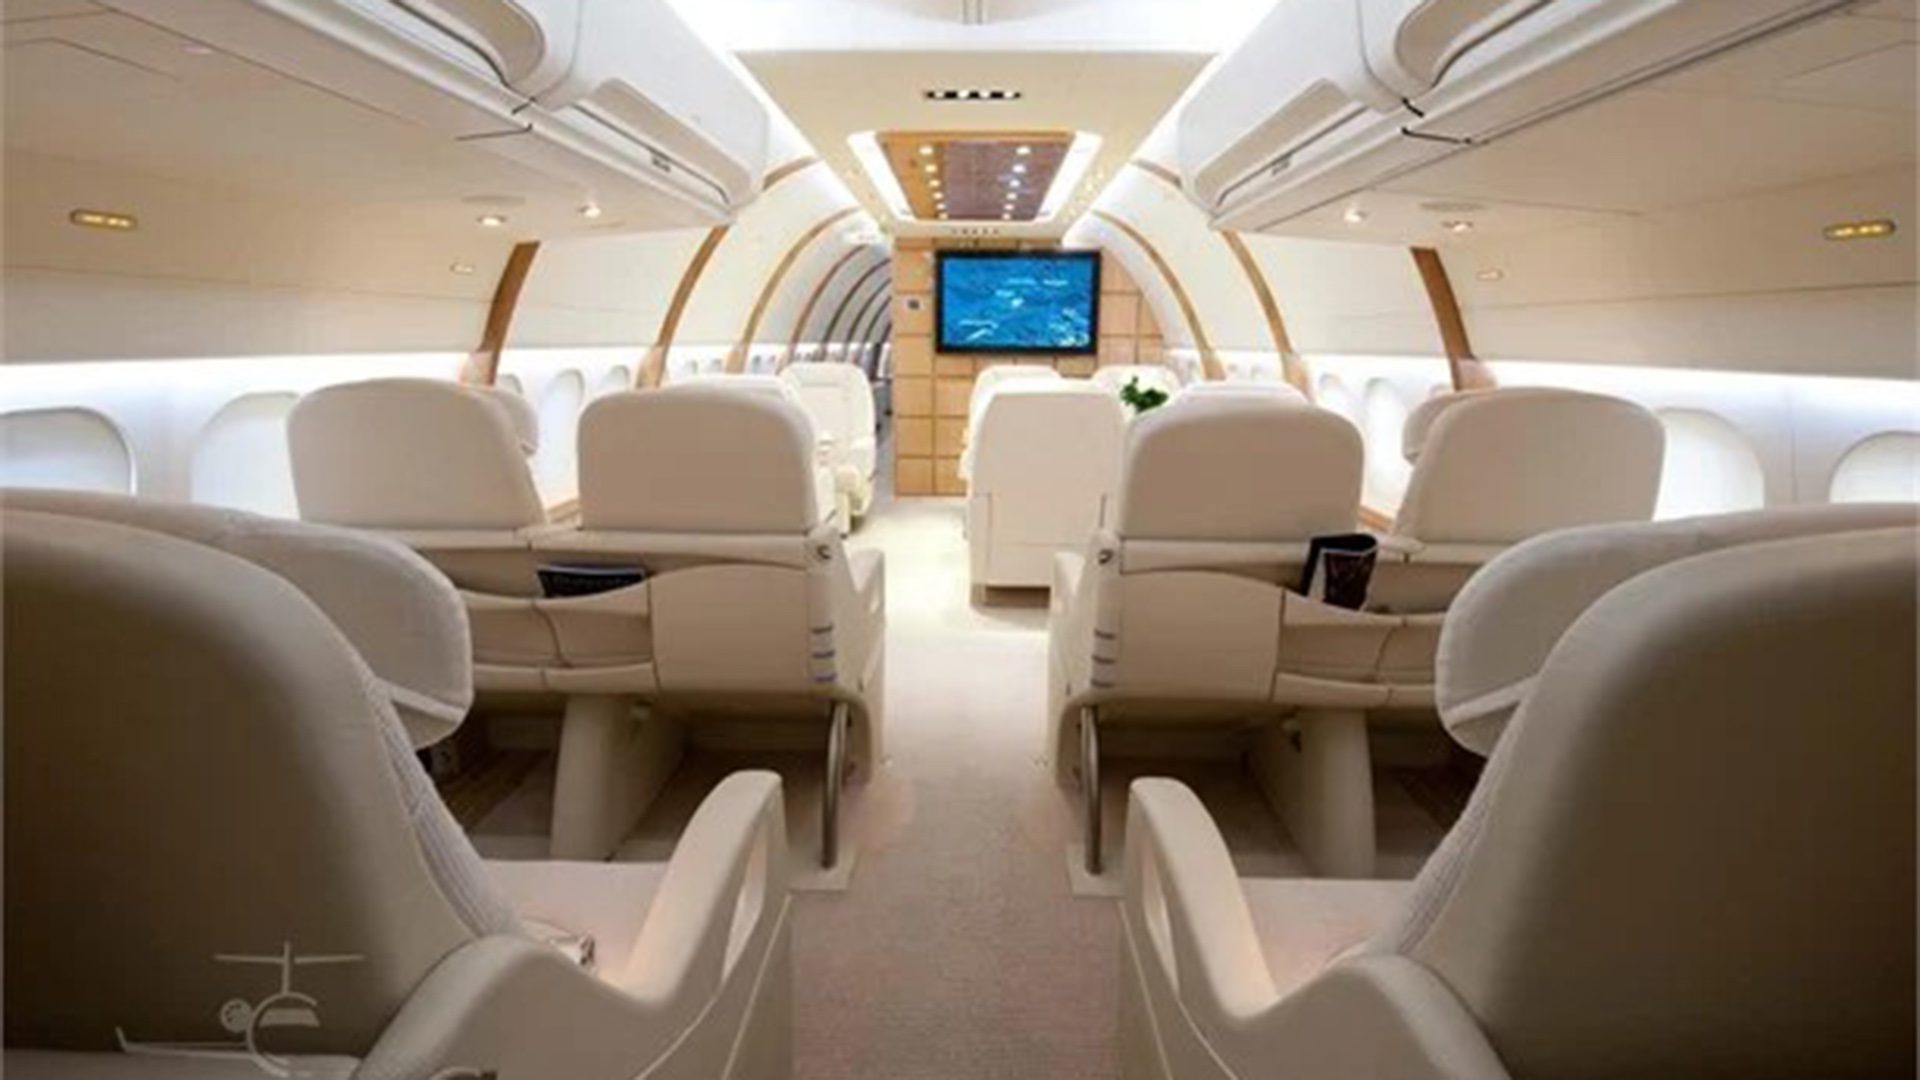 Among the amenities offered by the plane are a master bedroom and two more for visitors